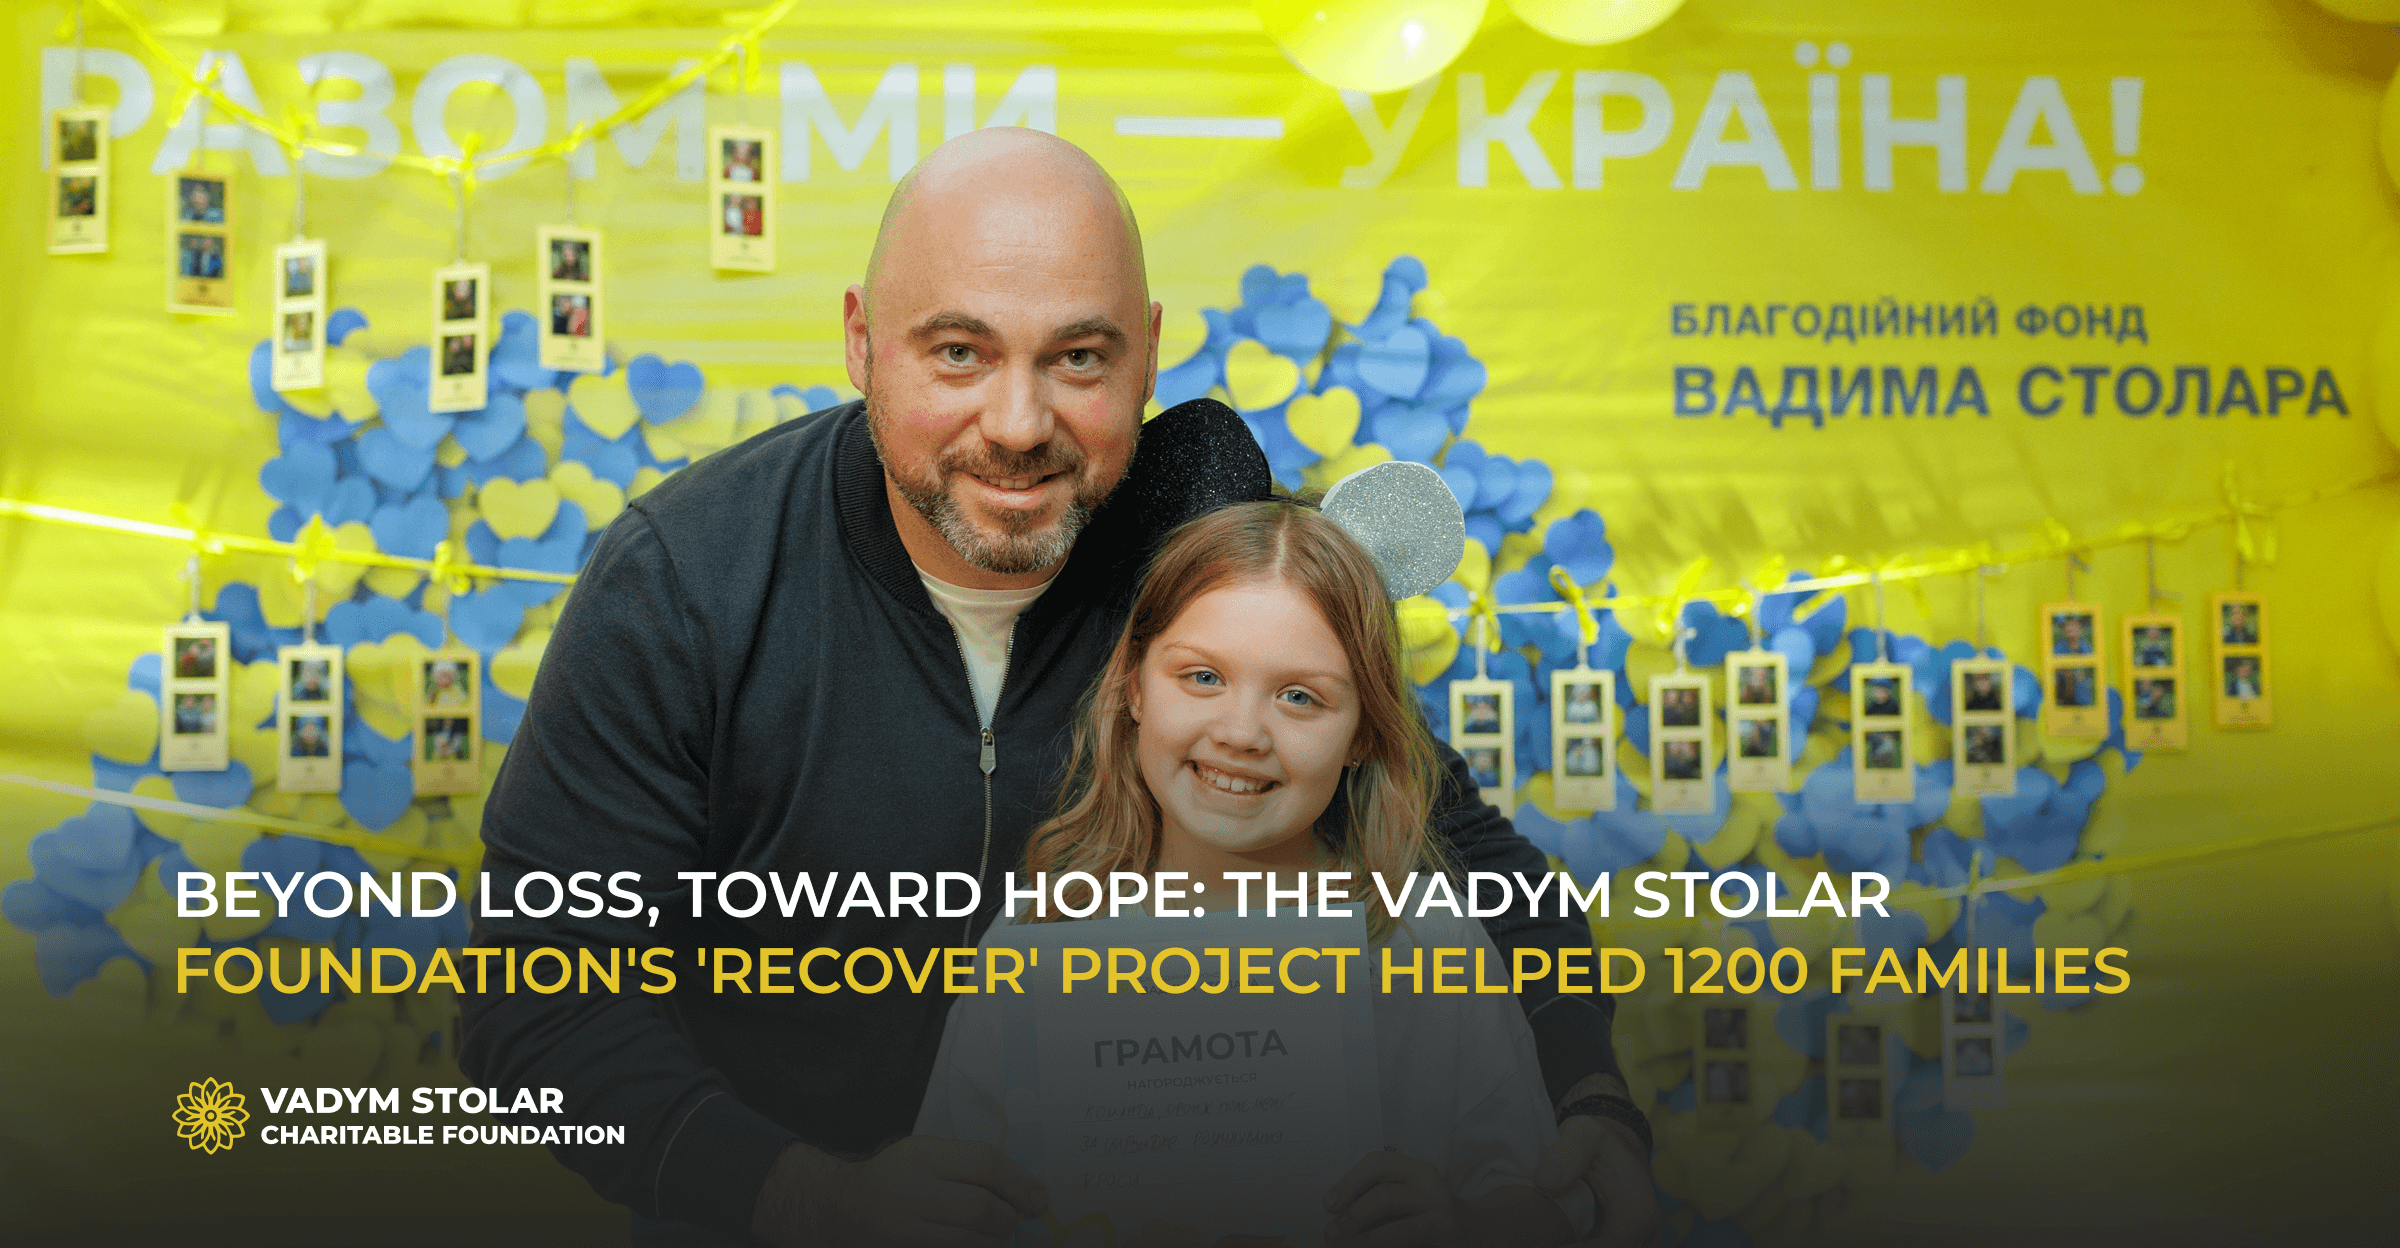 6 stages, 1,200 families: how the "Recover" project from the Vadym Stolar Foundation has been helping Ukrainians